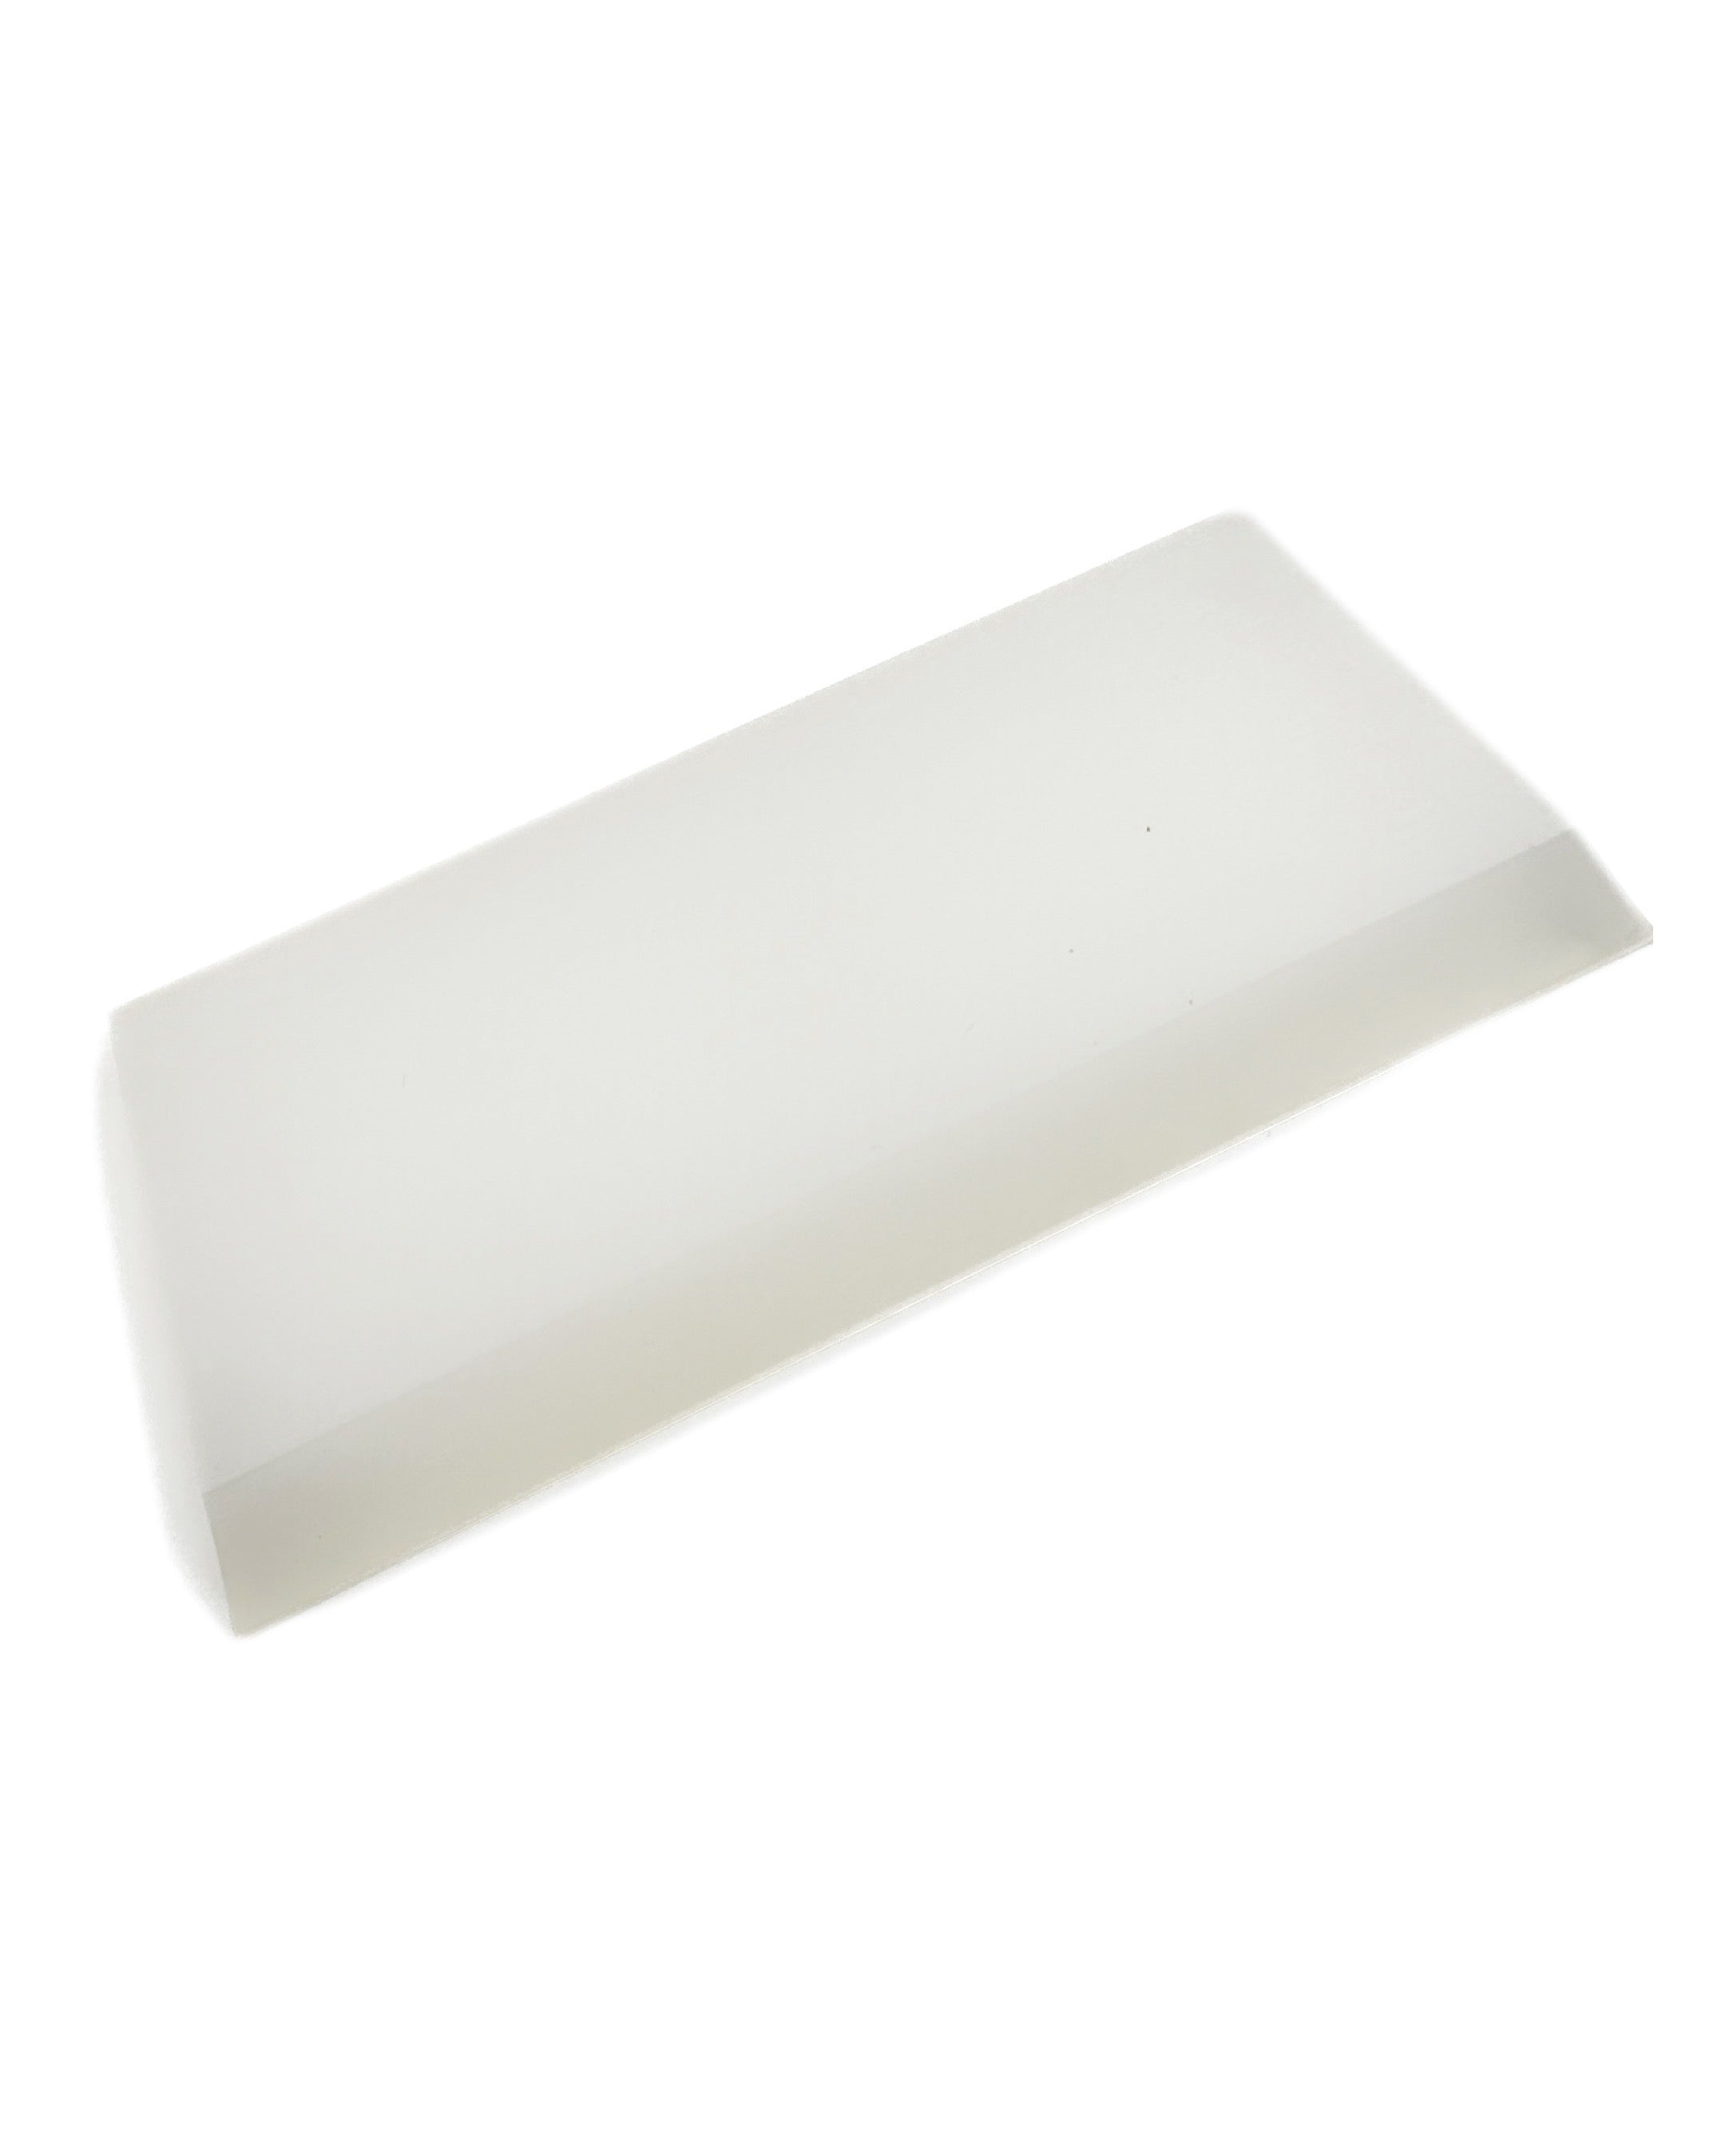 5” Cropped Clear Clean Squeegee